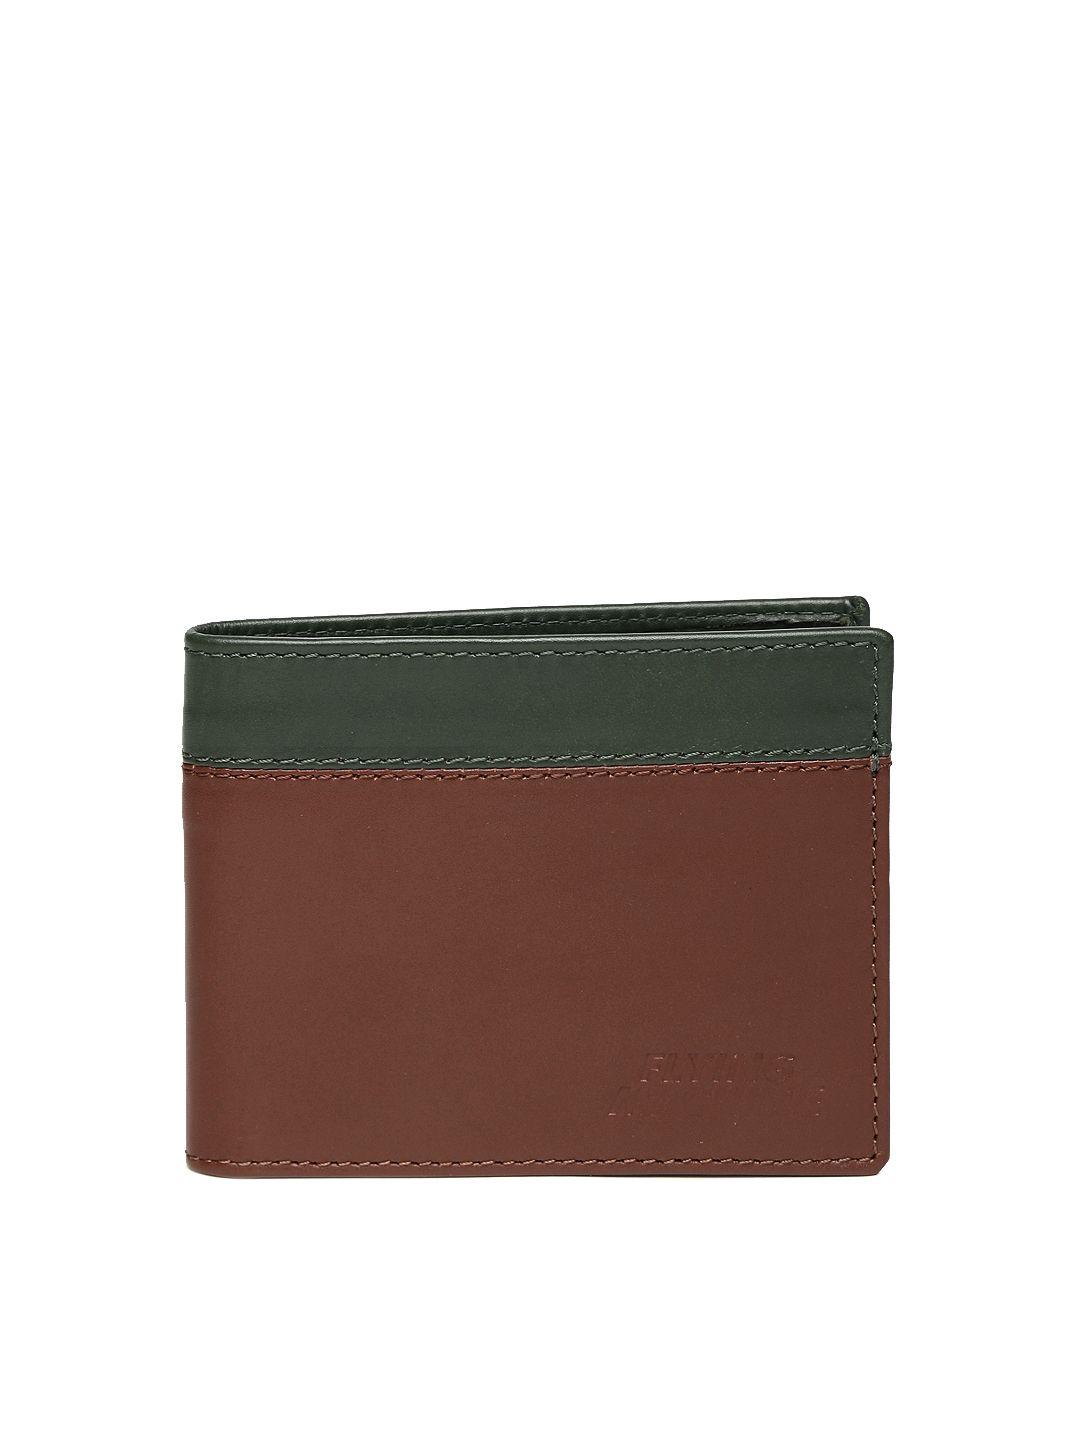 flying machine men brown & green two fold leather card holder